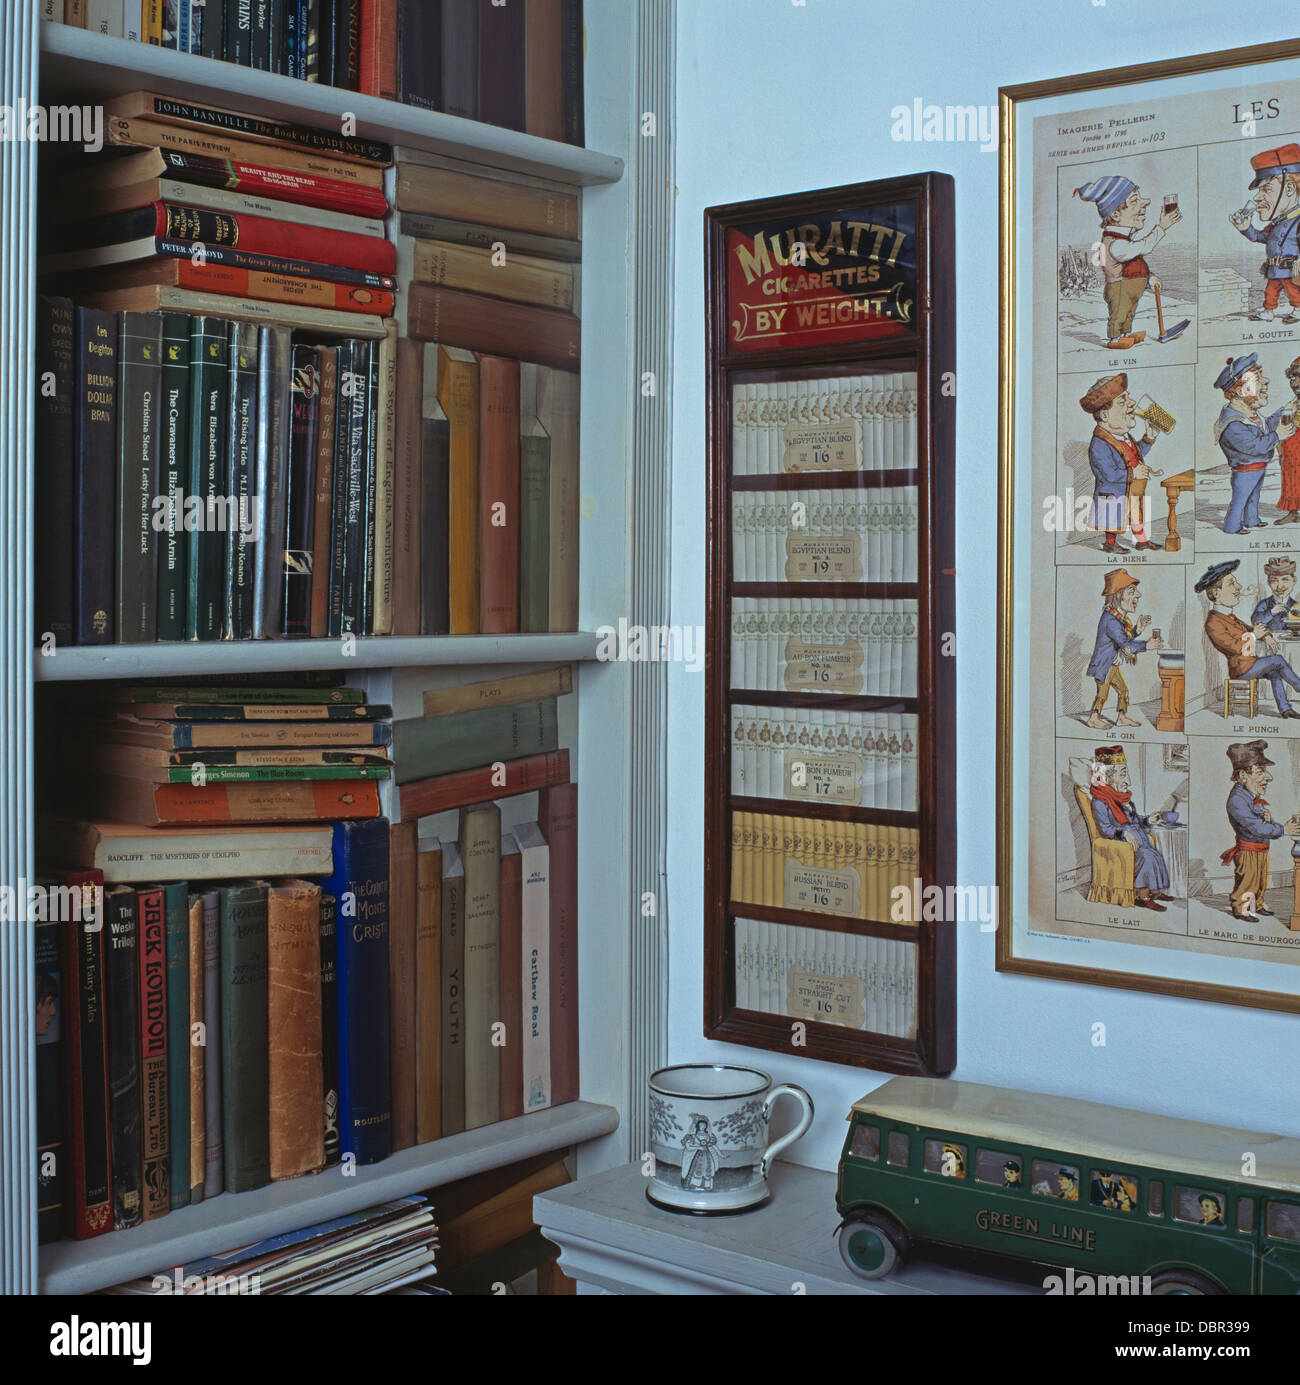 Books on shelves with trompe-l'oeil book panels beside framed Muratti cigarettes in small hall Stock Photo